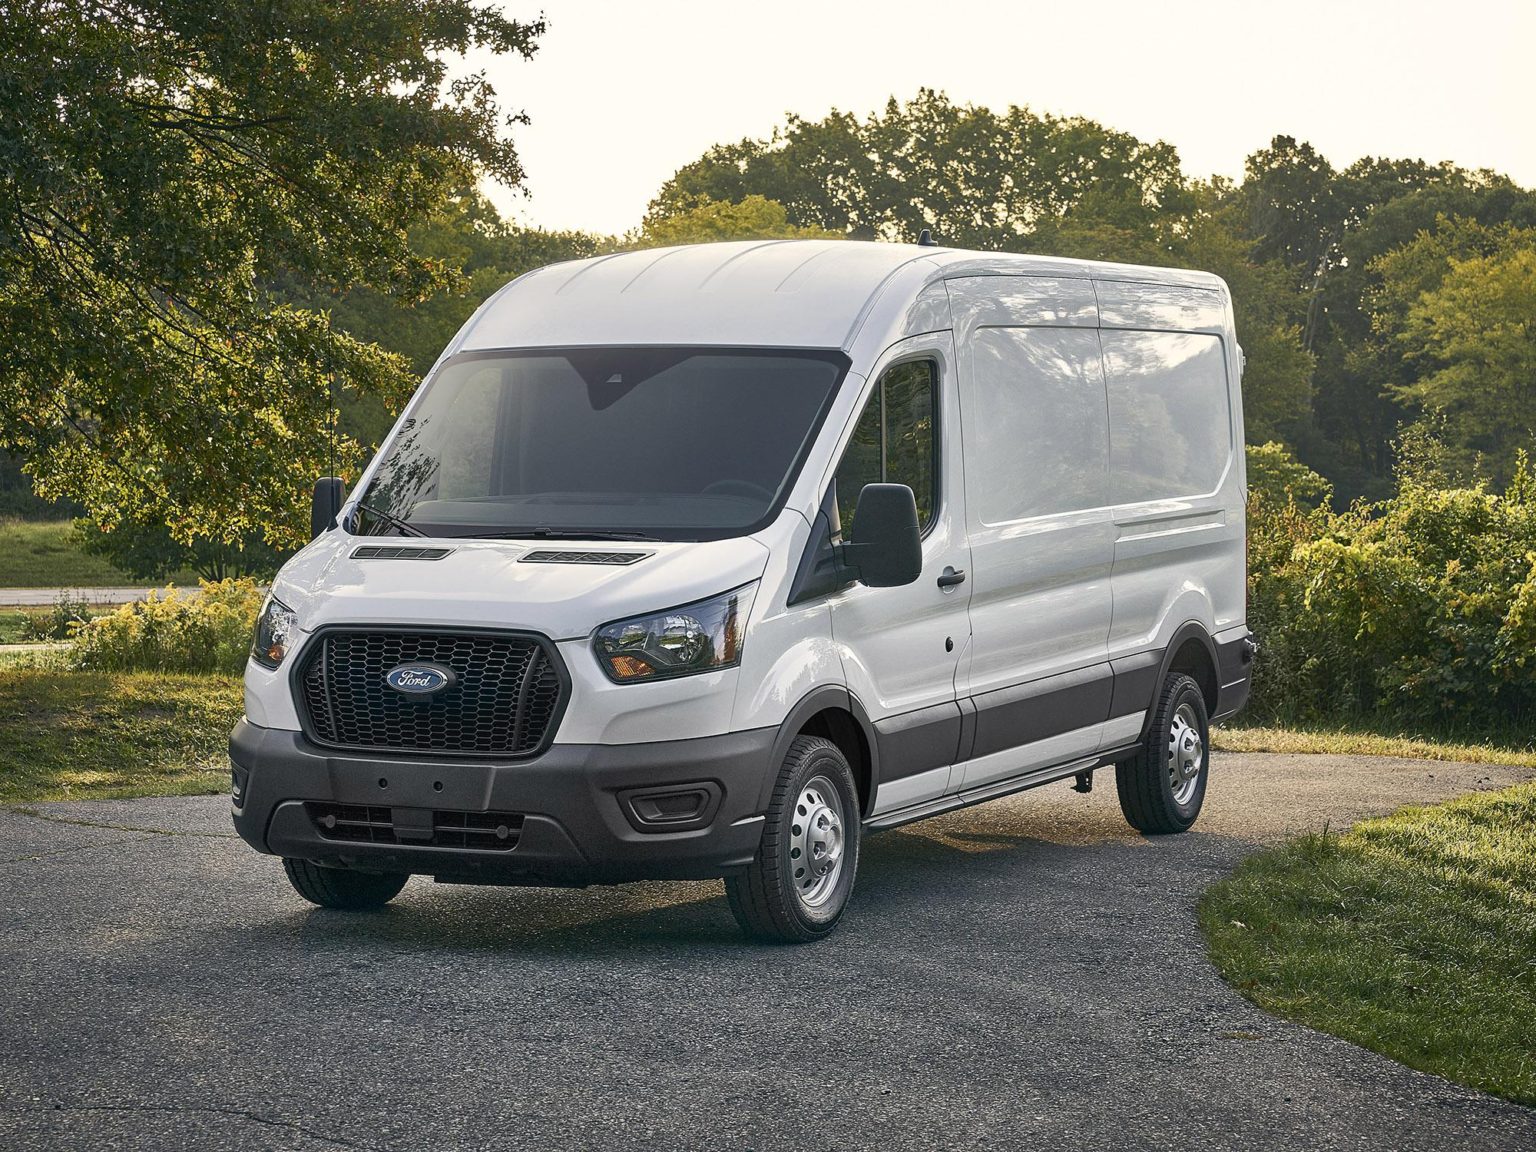 The Ford Transit offers more comfort than it looks like it should.